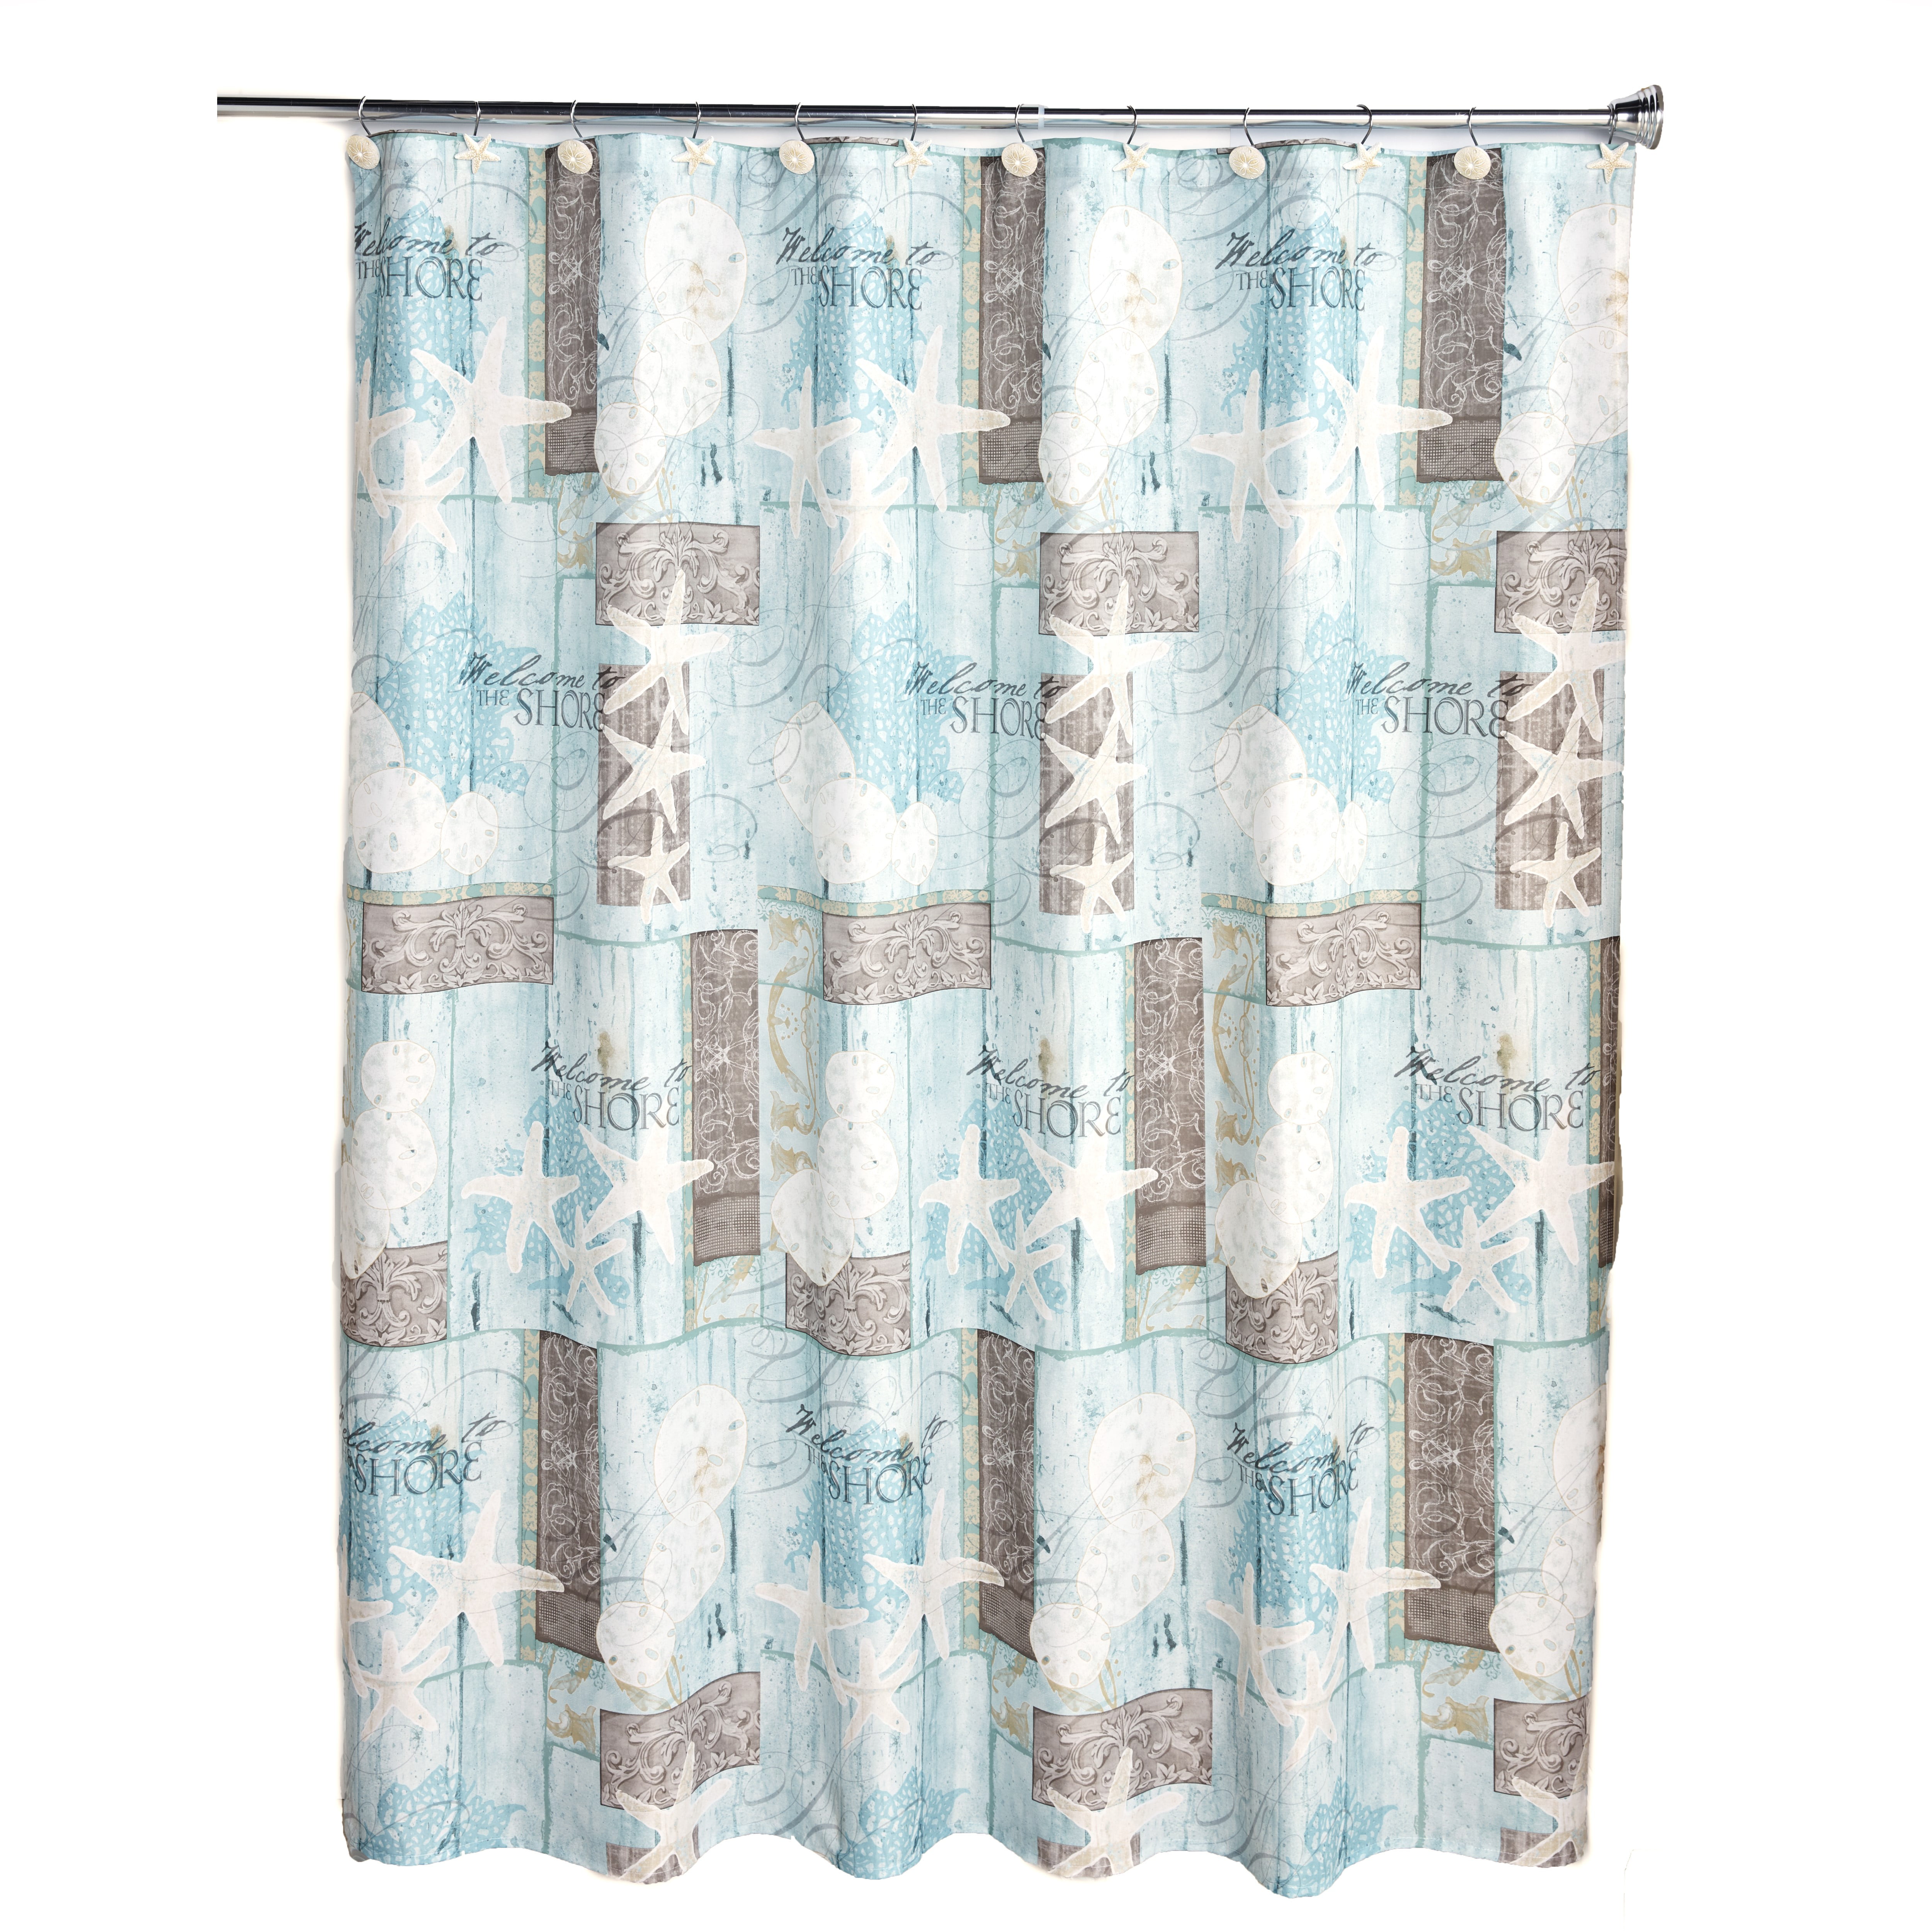 Coastal Icons Shower Curtain, Coastal Shower Curtains Bed Bath And Beyond